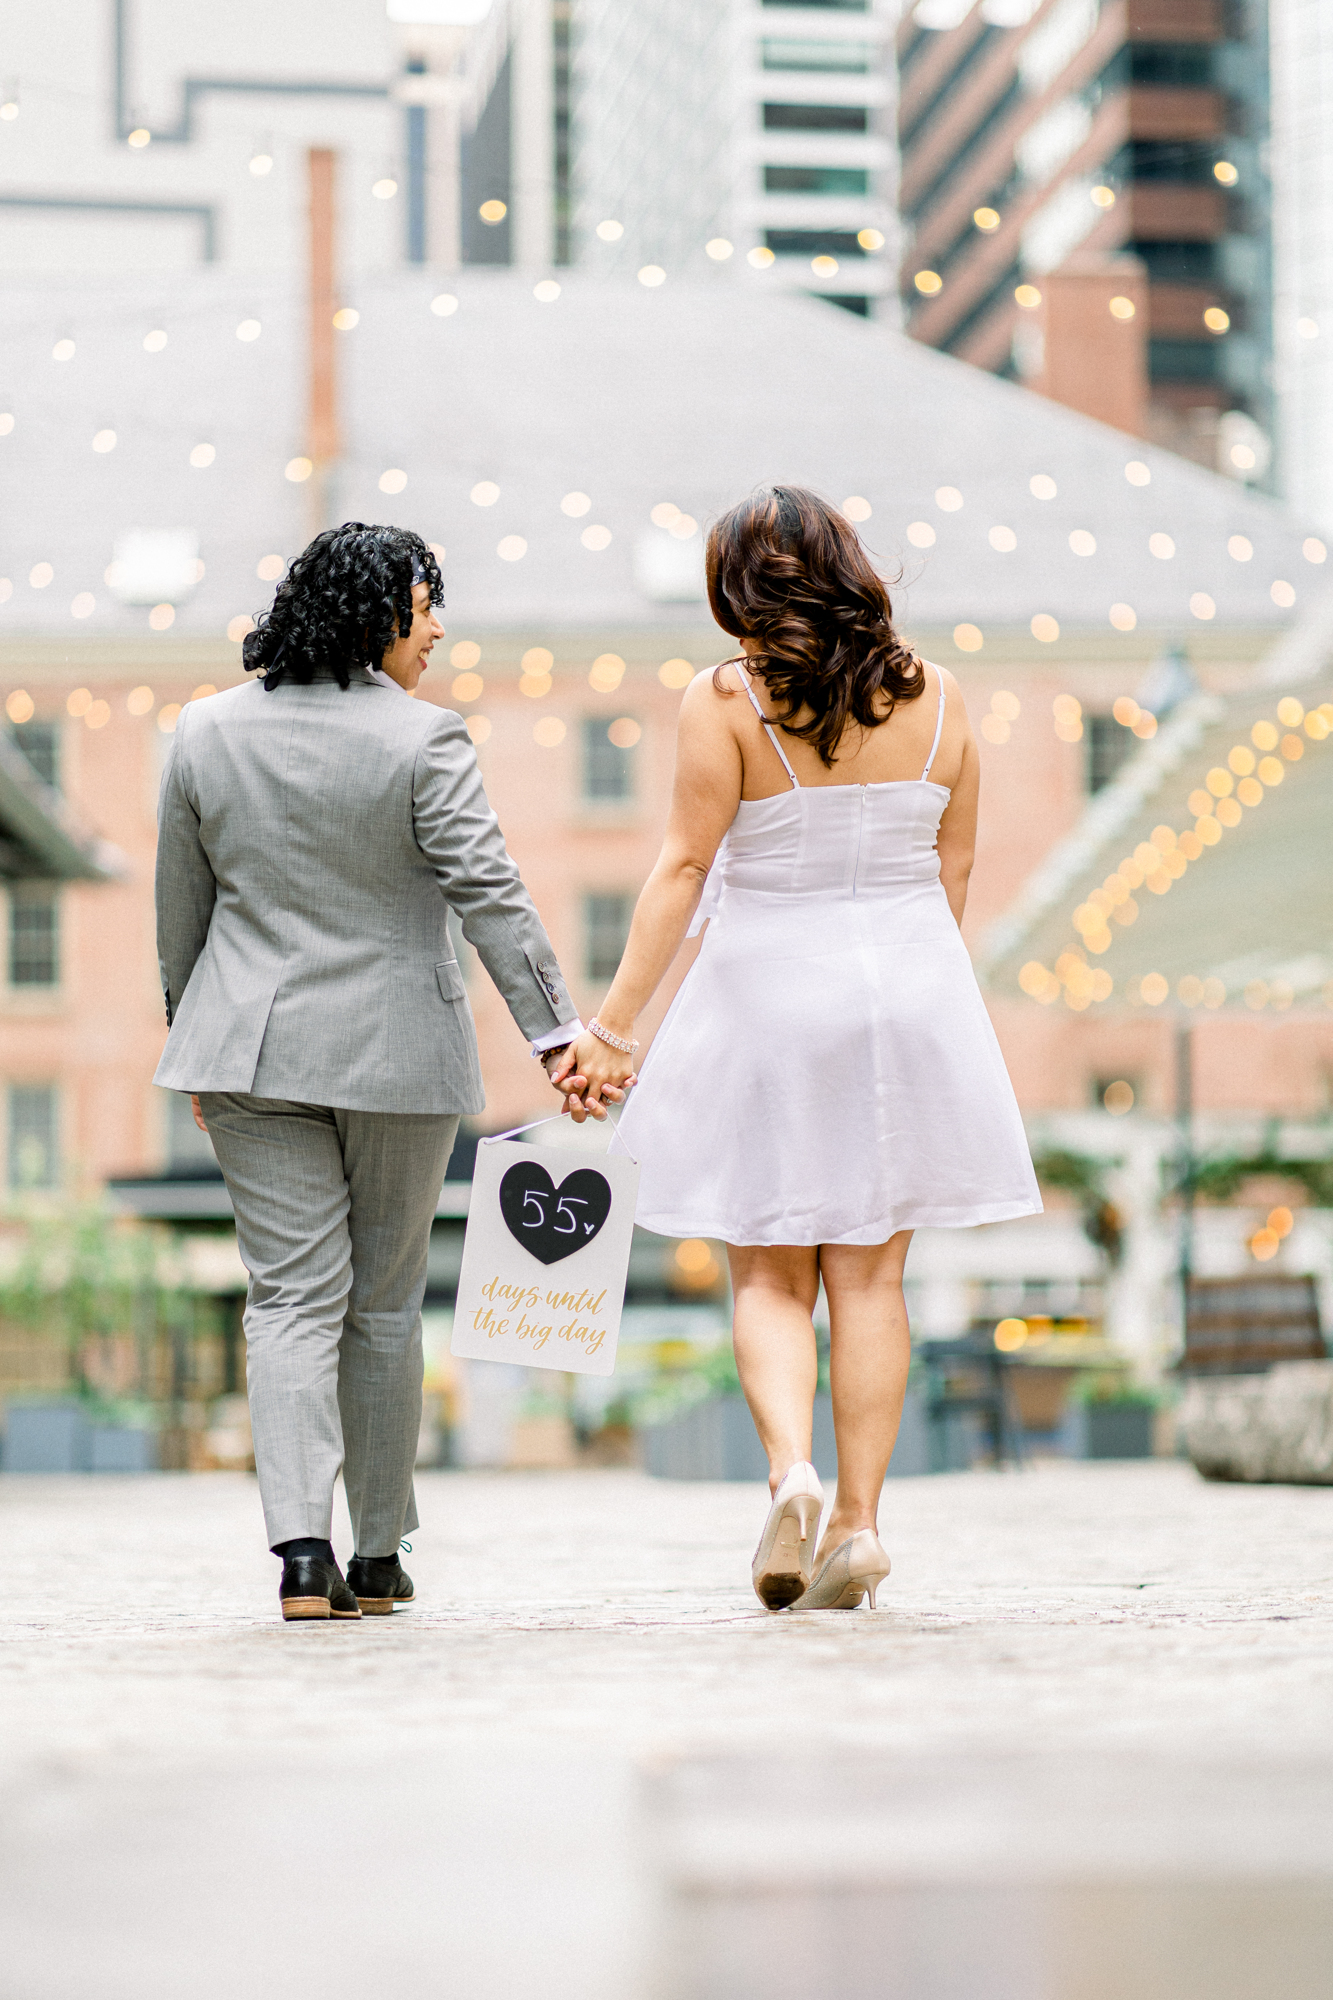 Spectacular South Street Seaport Engagement Photography